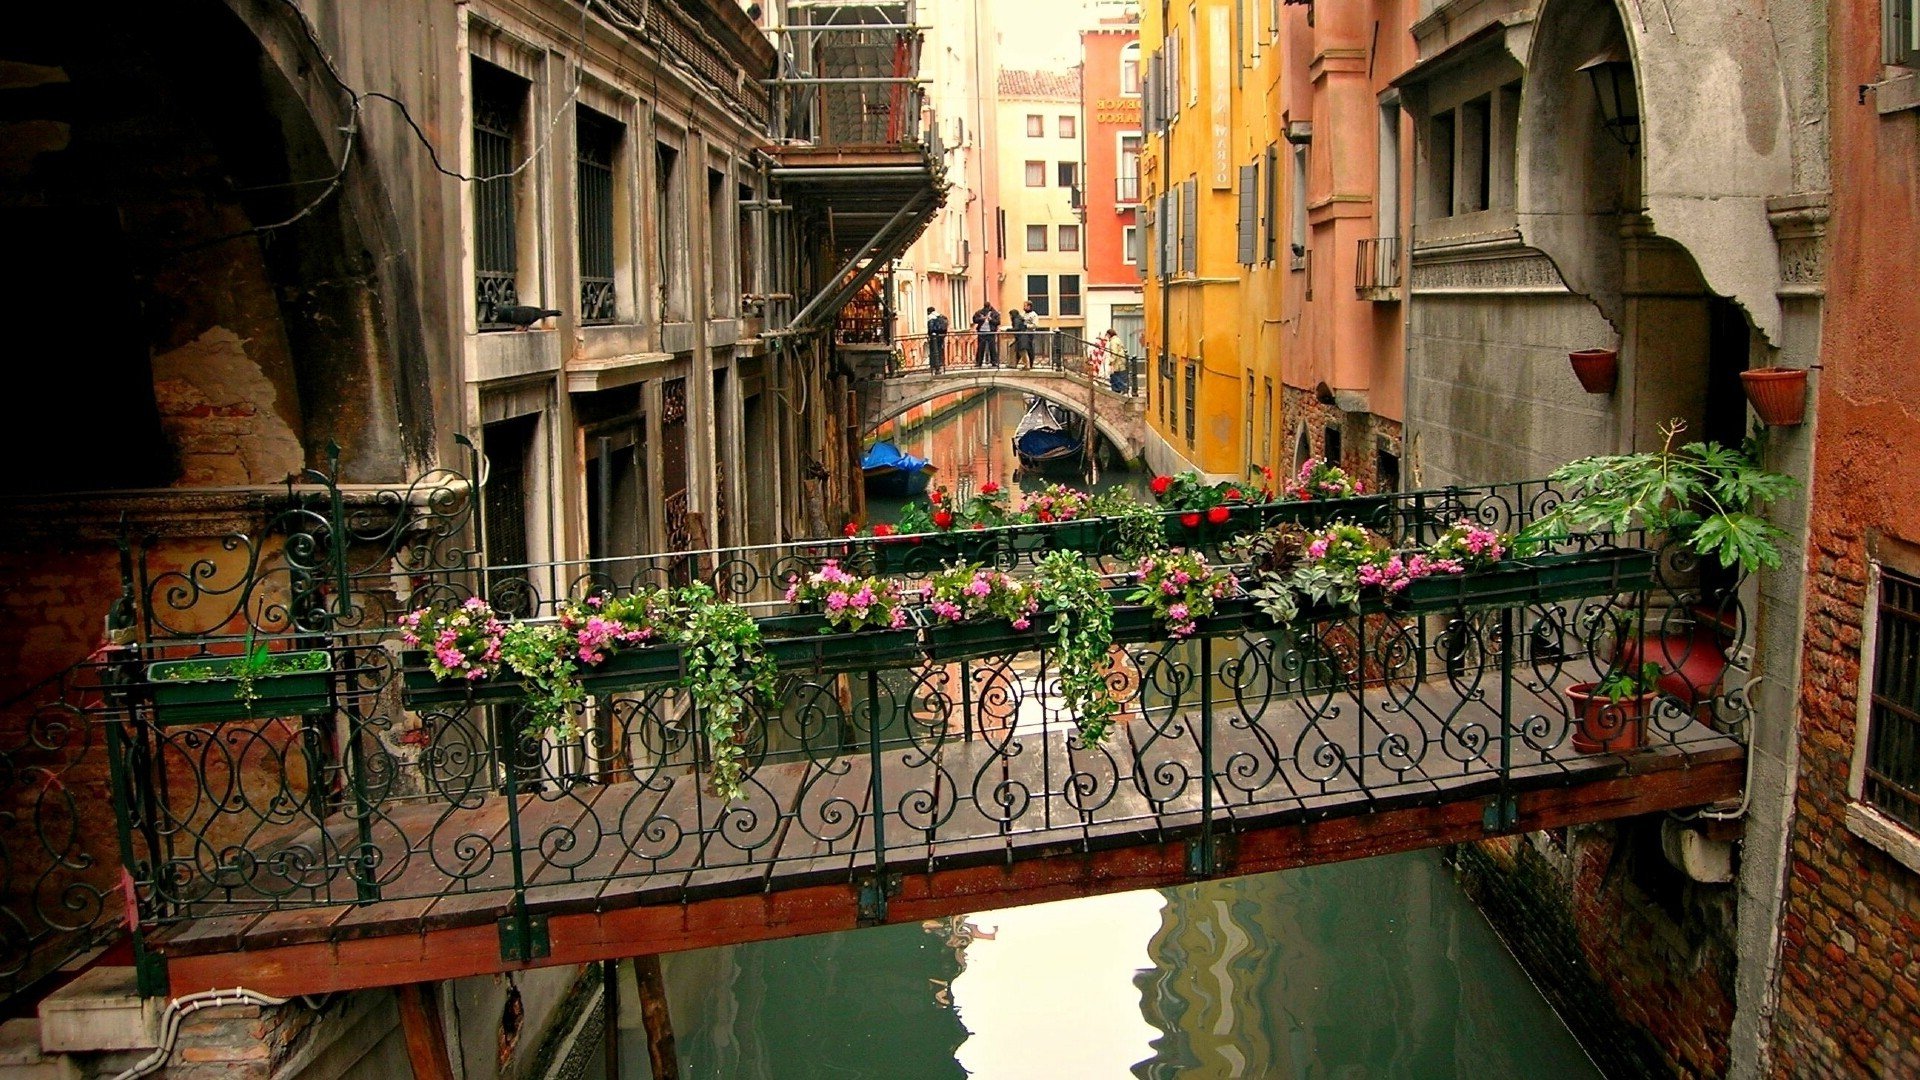 Wallpaper, boat, window, flowers, street, cityscape, Italy, architecture, water, building, reflection, Venice, house, Tourism, bridge, town, canal, color, travel, flower, 1920x1080 px, urban area, waterway, gondola 1920x1080